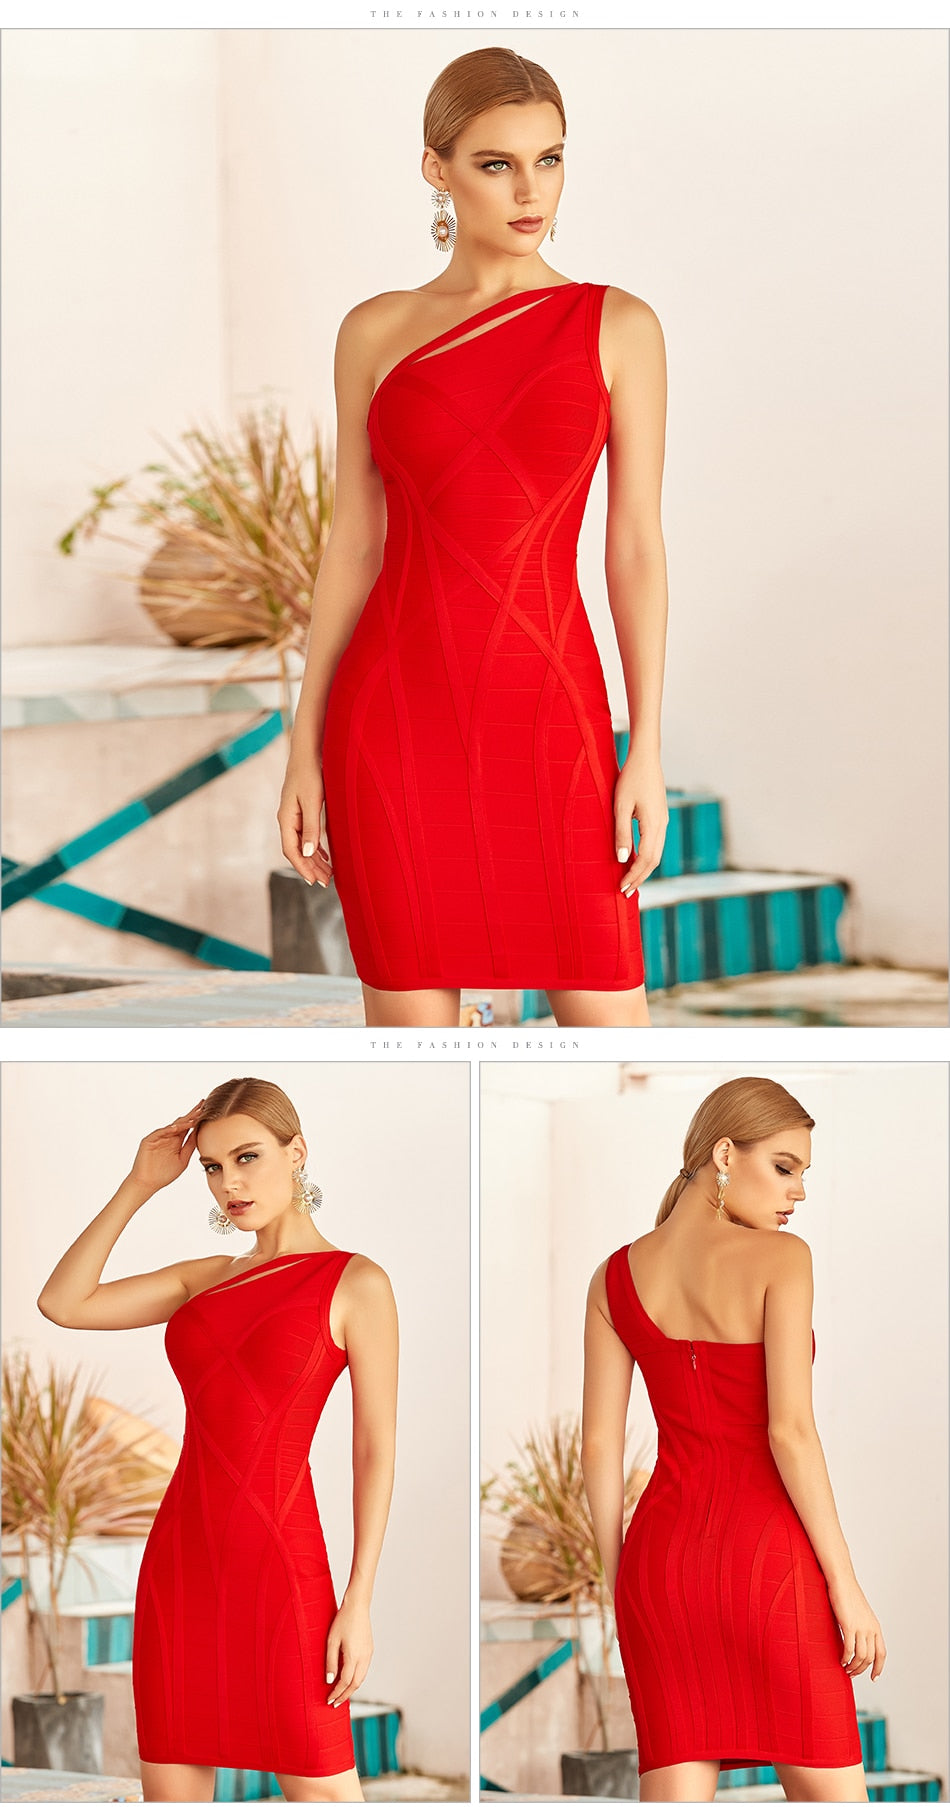 New One Shoulder Summer Women Bodycon Bandage Dress Sexy Hollow Out Sleeveless Midi Celebrity Runway Party Club Dress